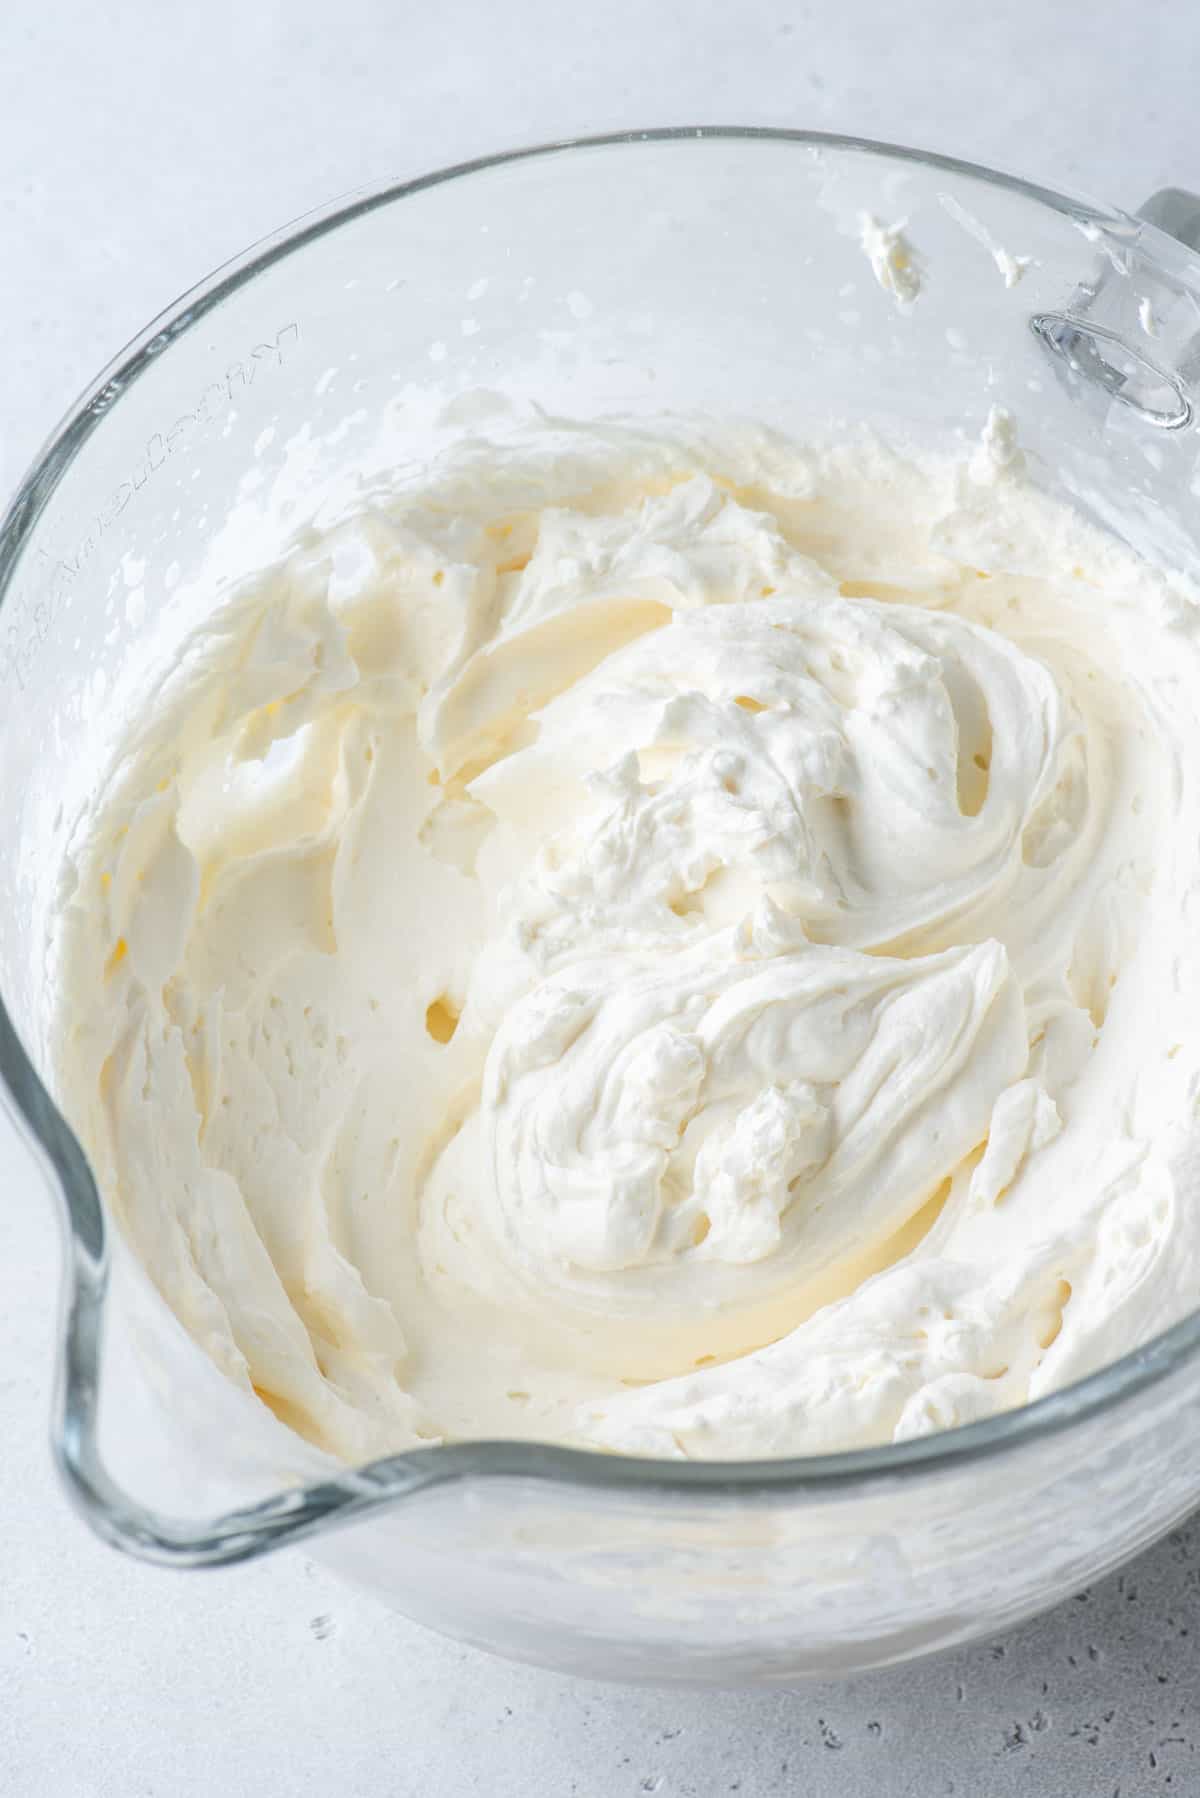 Stabilized whipped cream in a clear glass mixing bowl